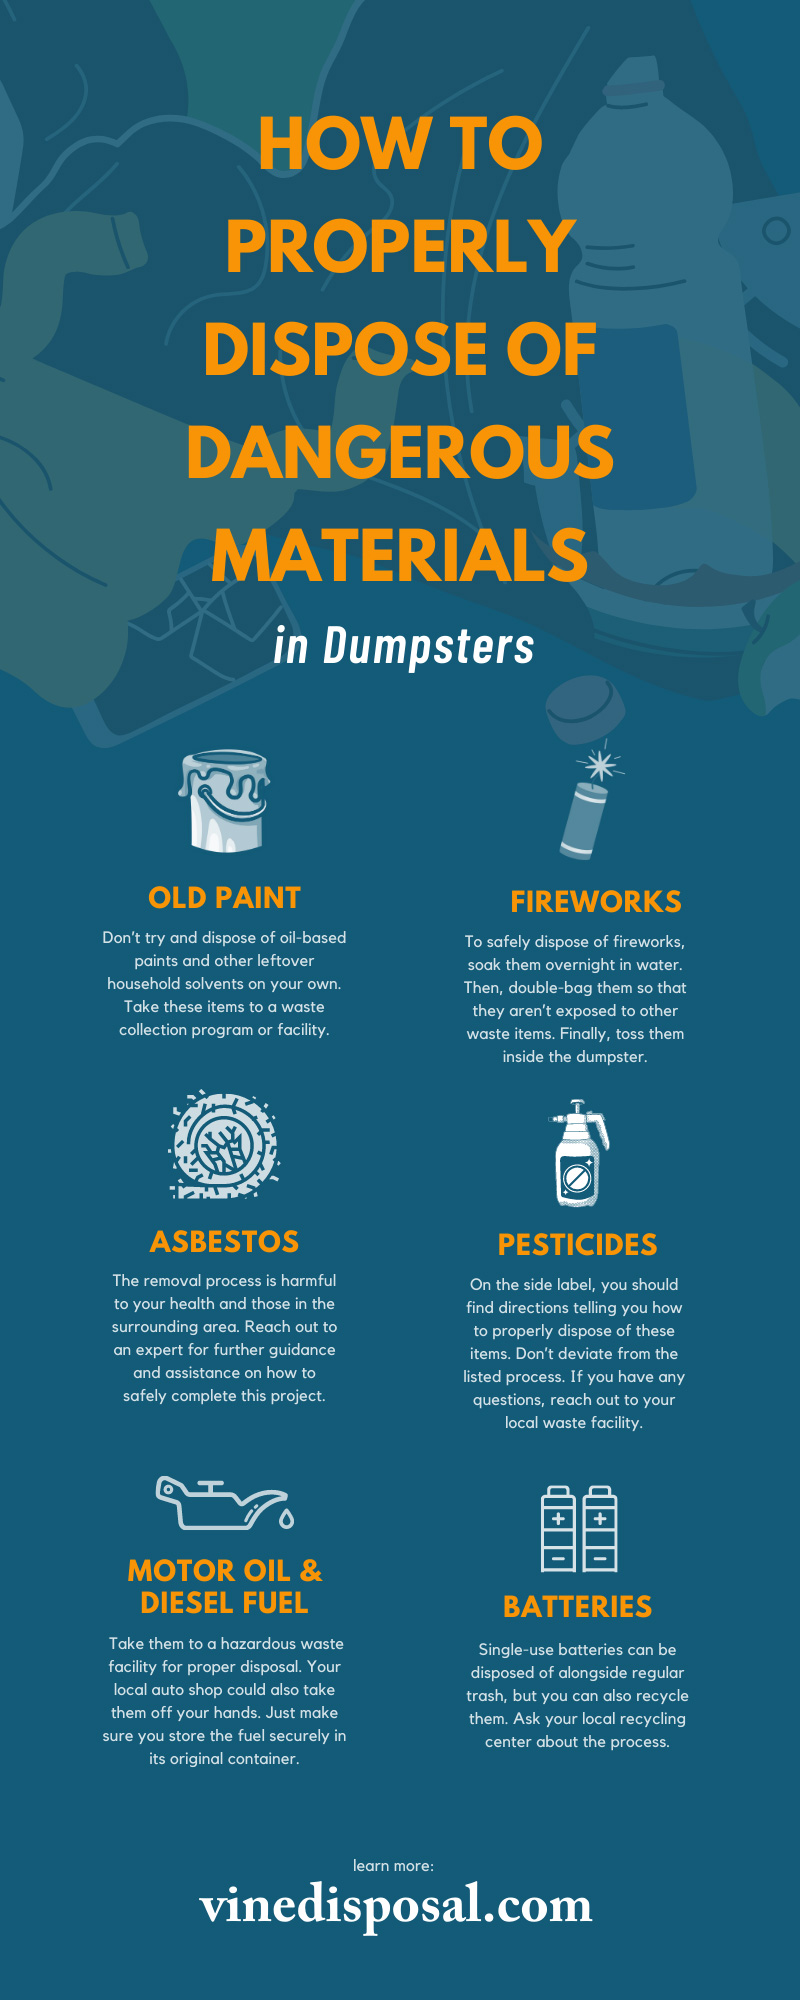 How To Properly Dispose of Dangerous Materials in Dumpsters